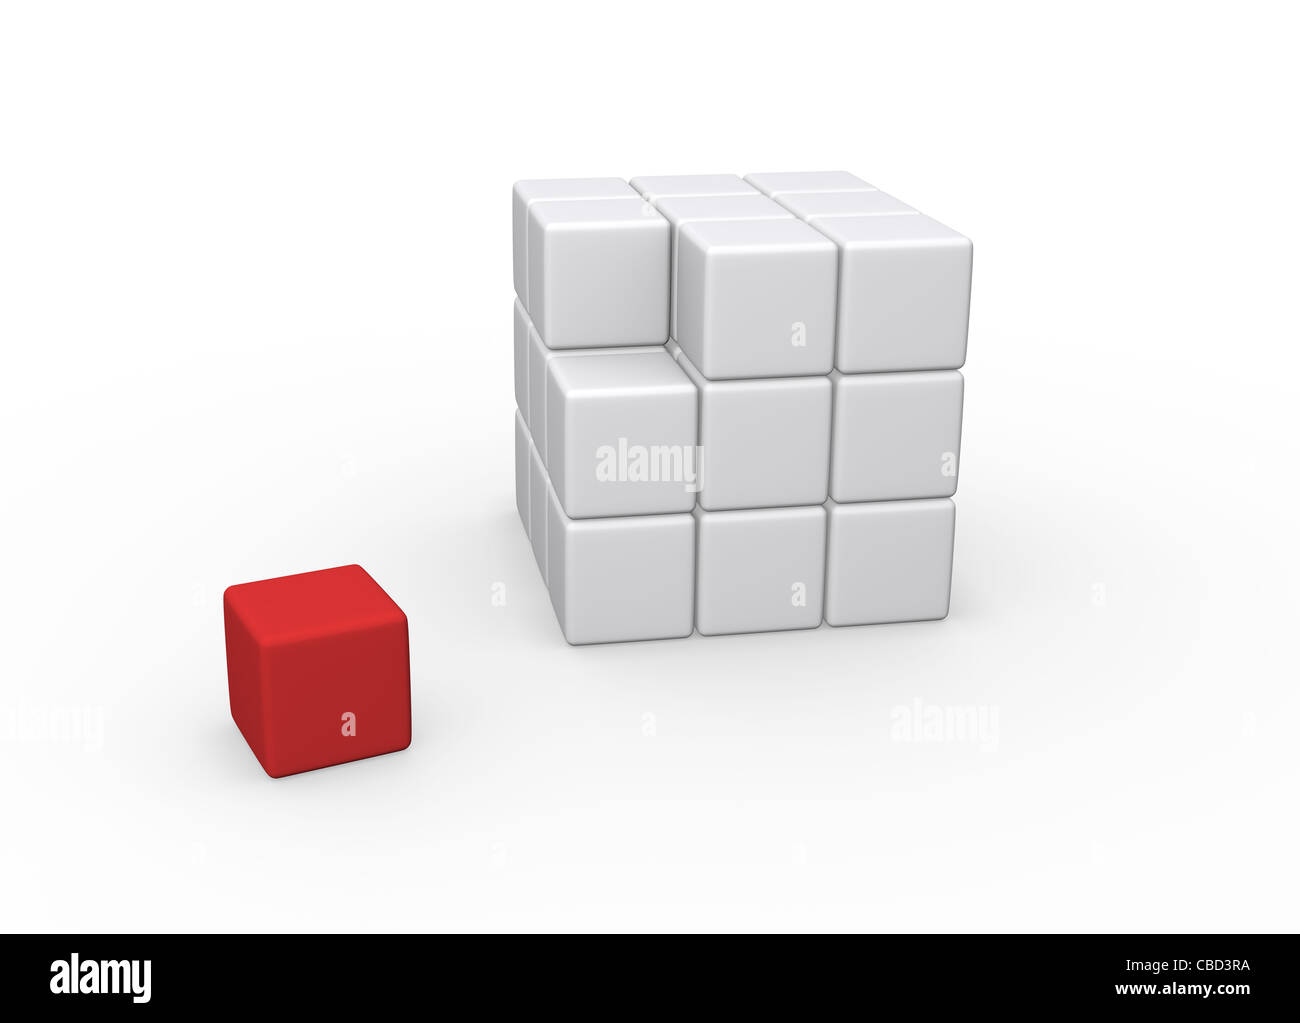 Red building block, to complete the cube; good for business concept. Large 3D render on a isolated white background. Stock Photo